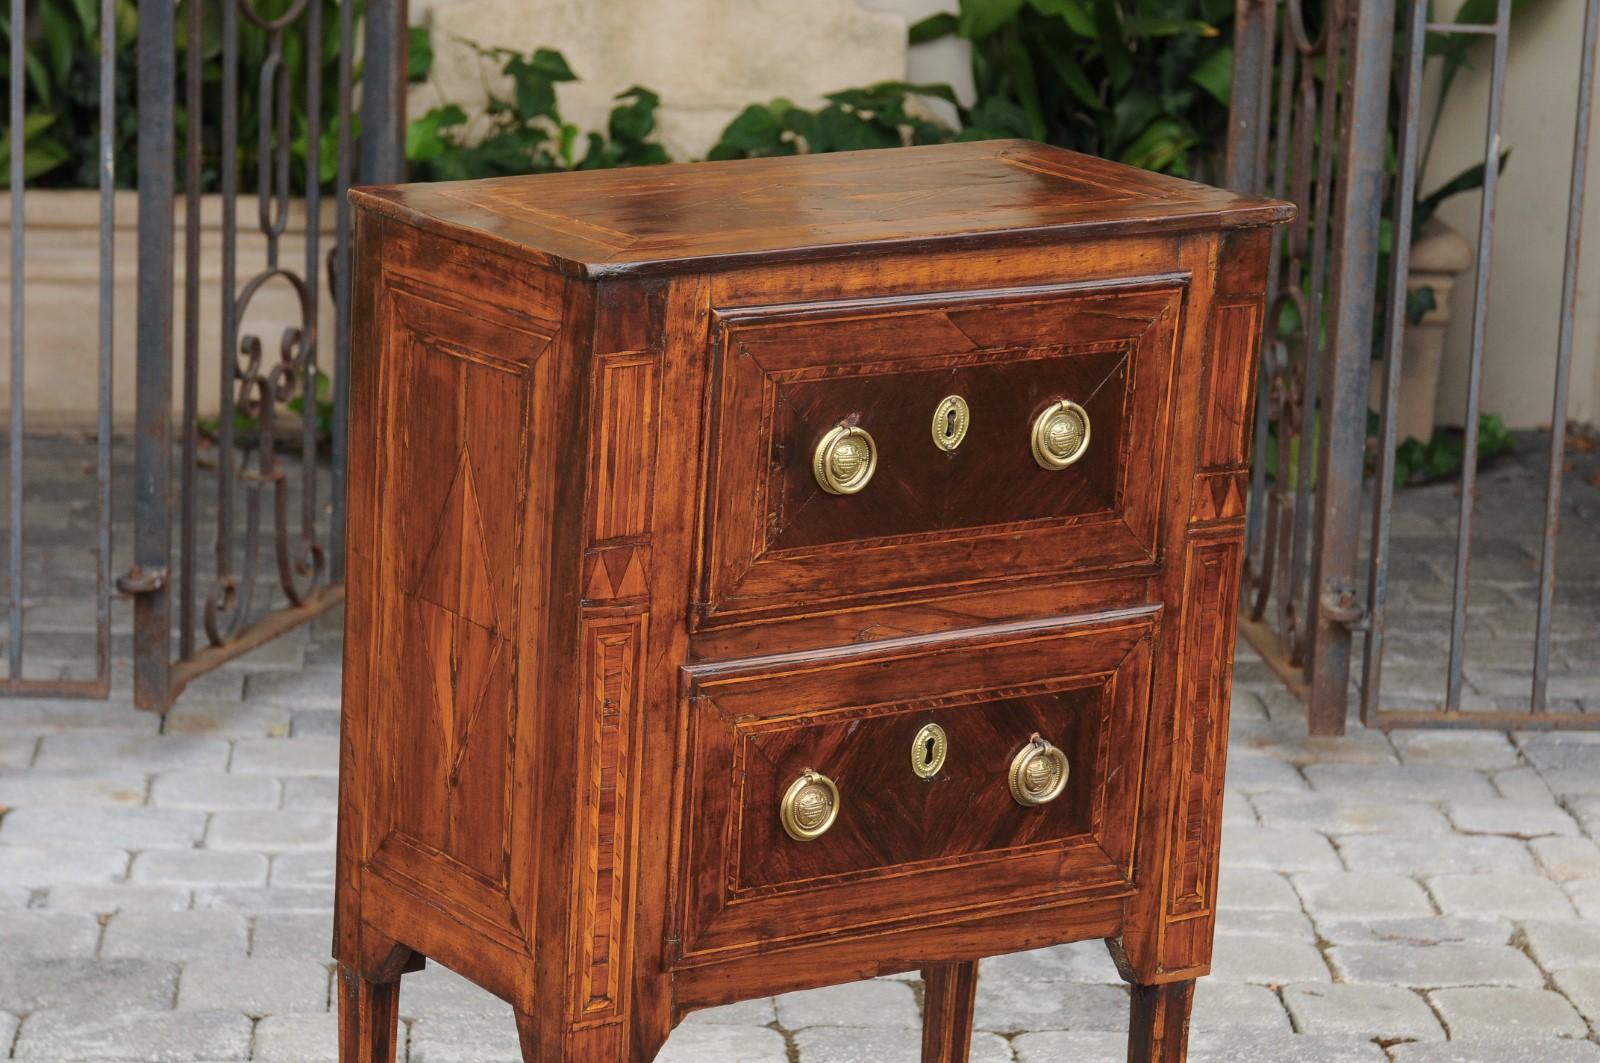 Inlay Petite Italian Neoclassical Period Walnut Commode circa 1800 with Inlaid Décor For Sale